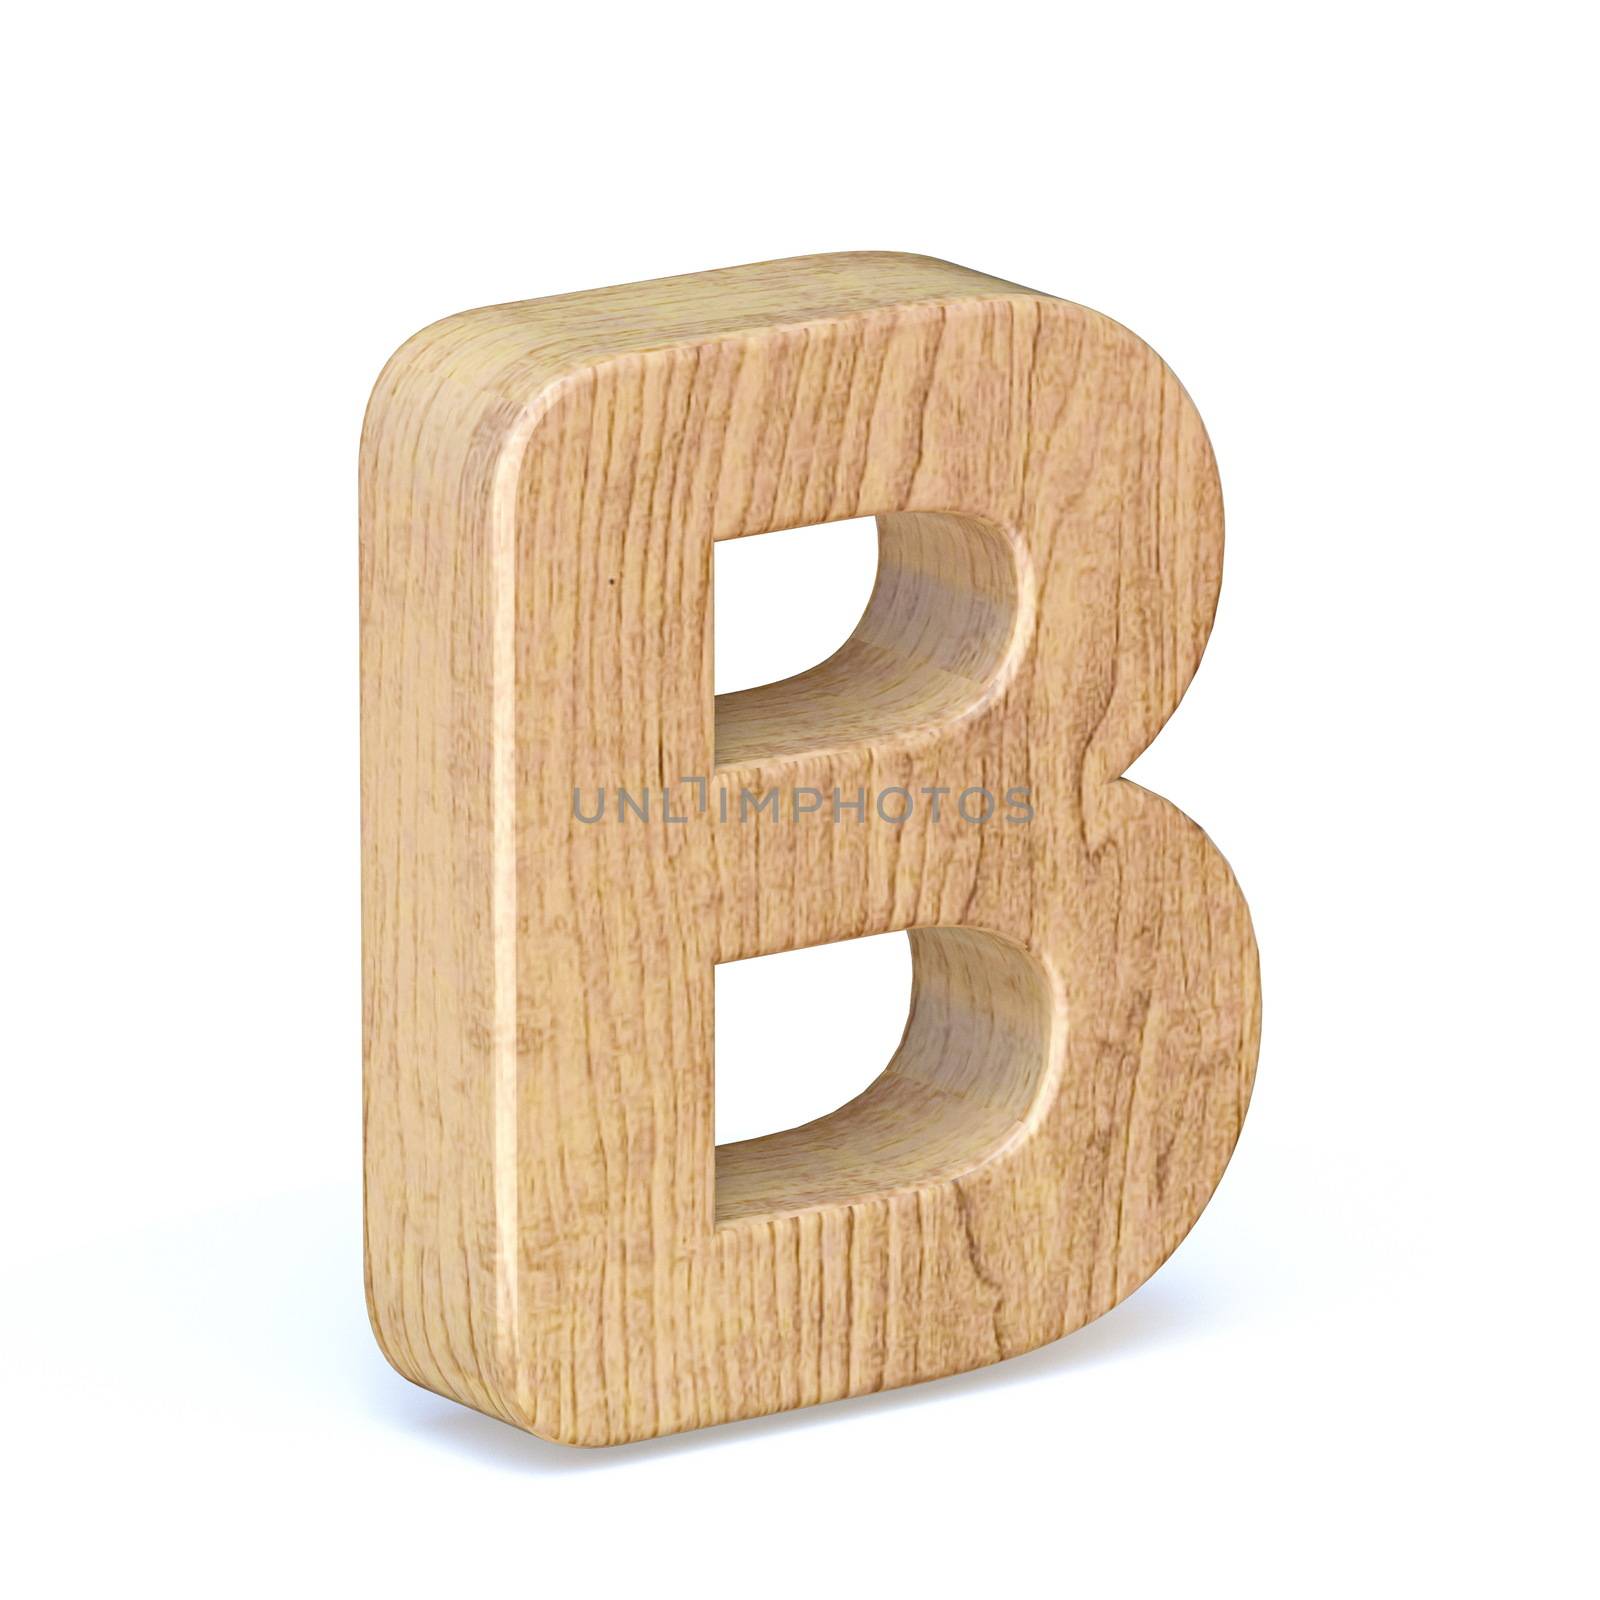 Rounded wooden font Letter B 3D by djmilic